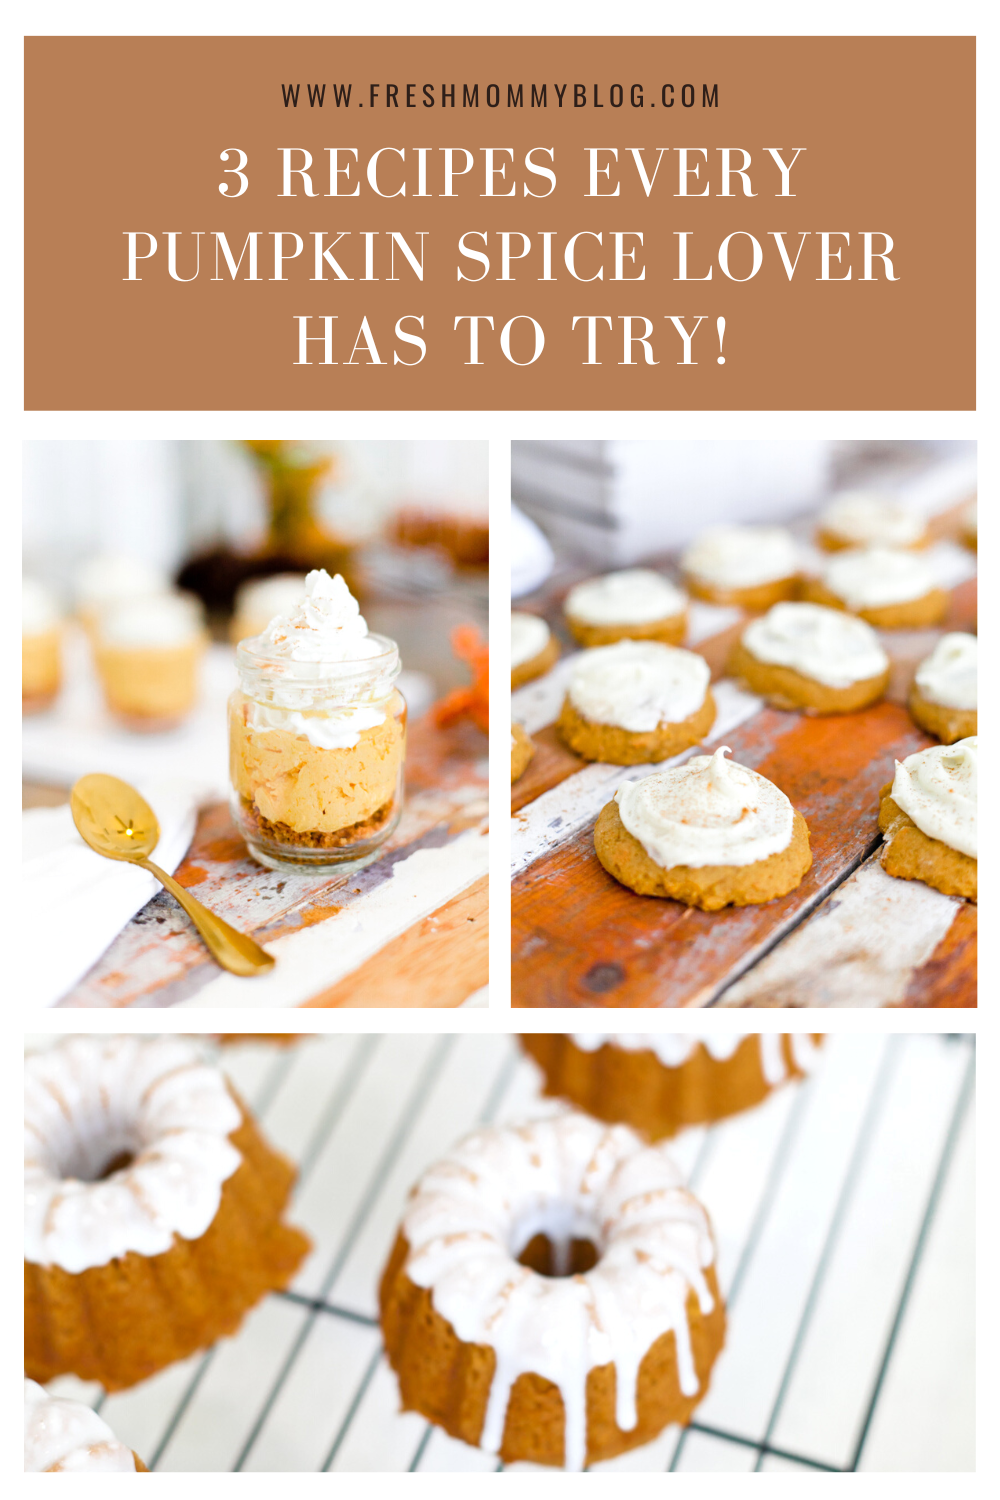 pumpkin spice lovers need to try these 3 dessert pumpkin recipes.